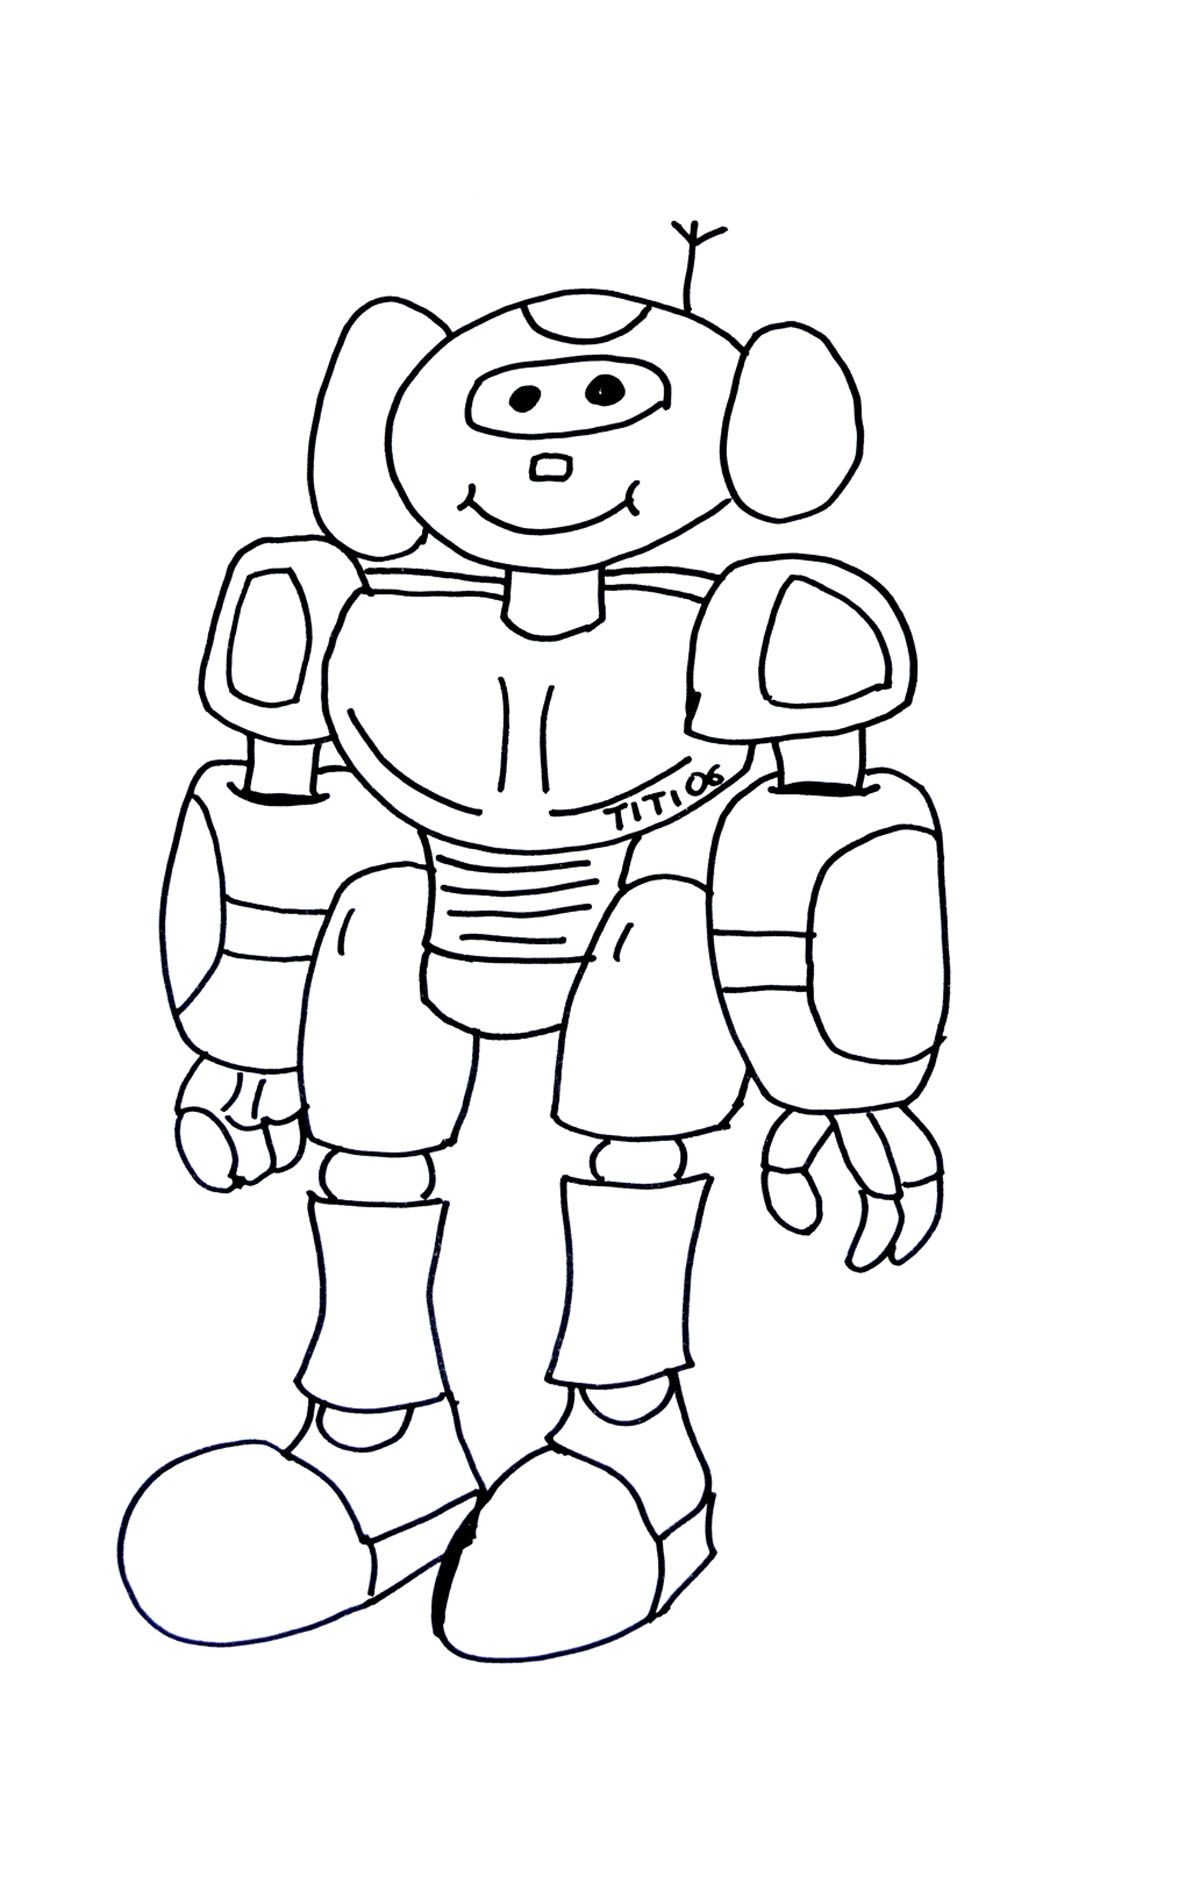 Robots to color for kids Robots Kids Coloring Pages